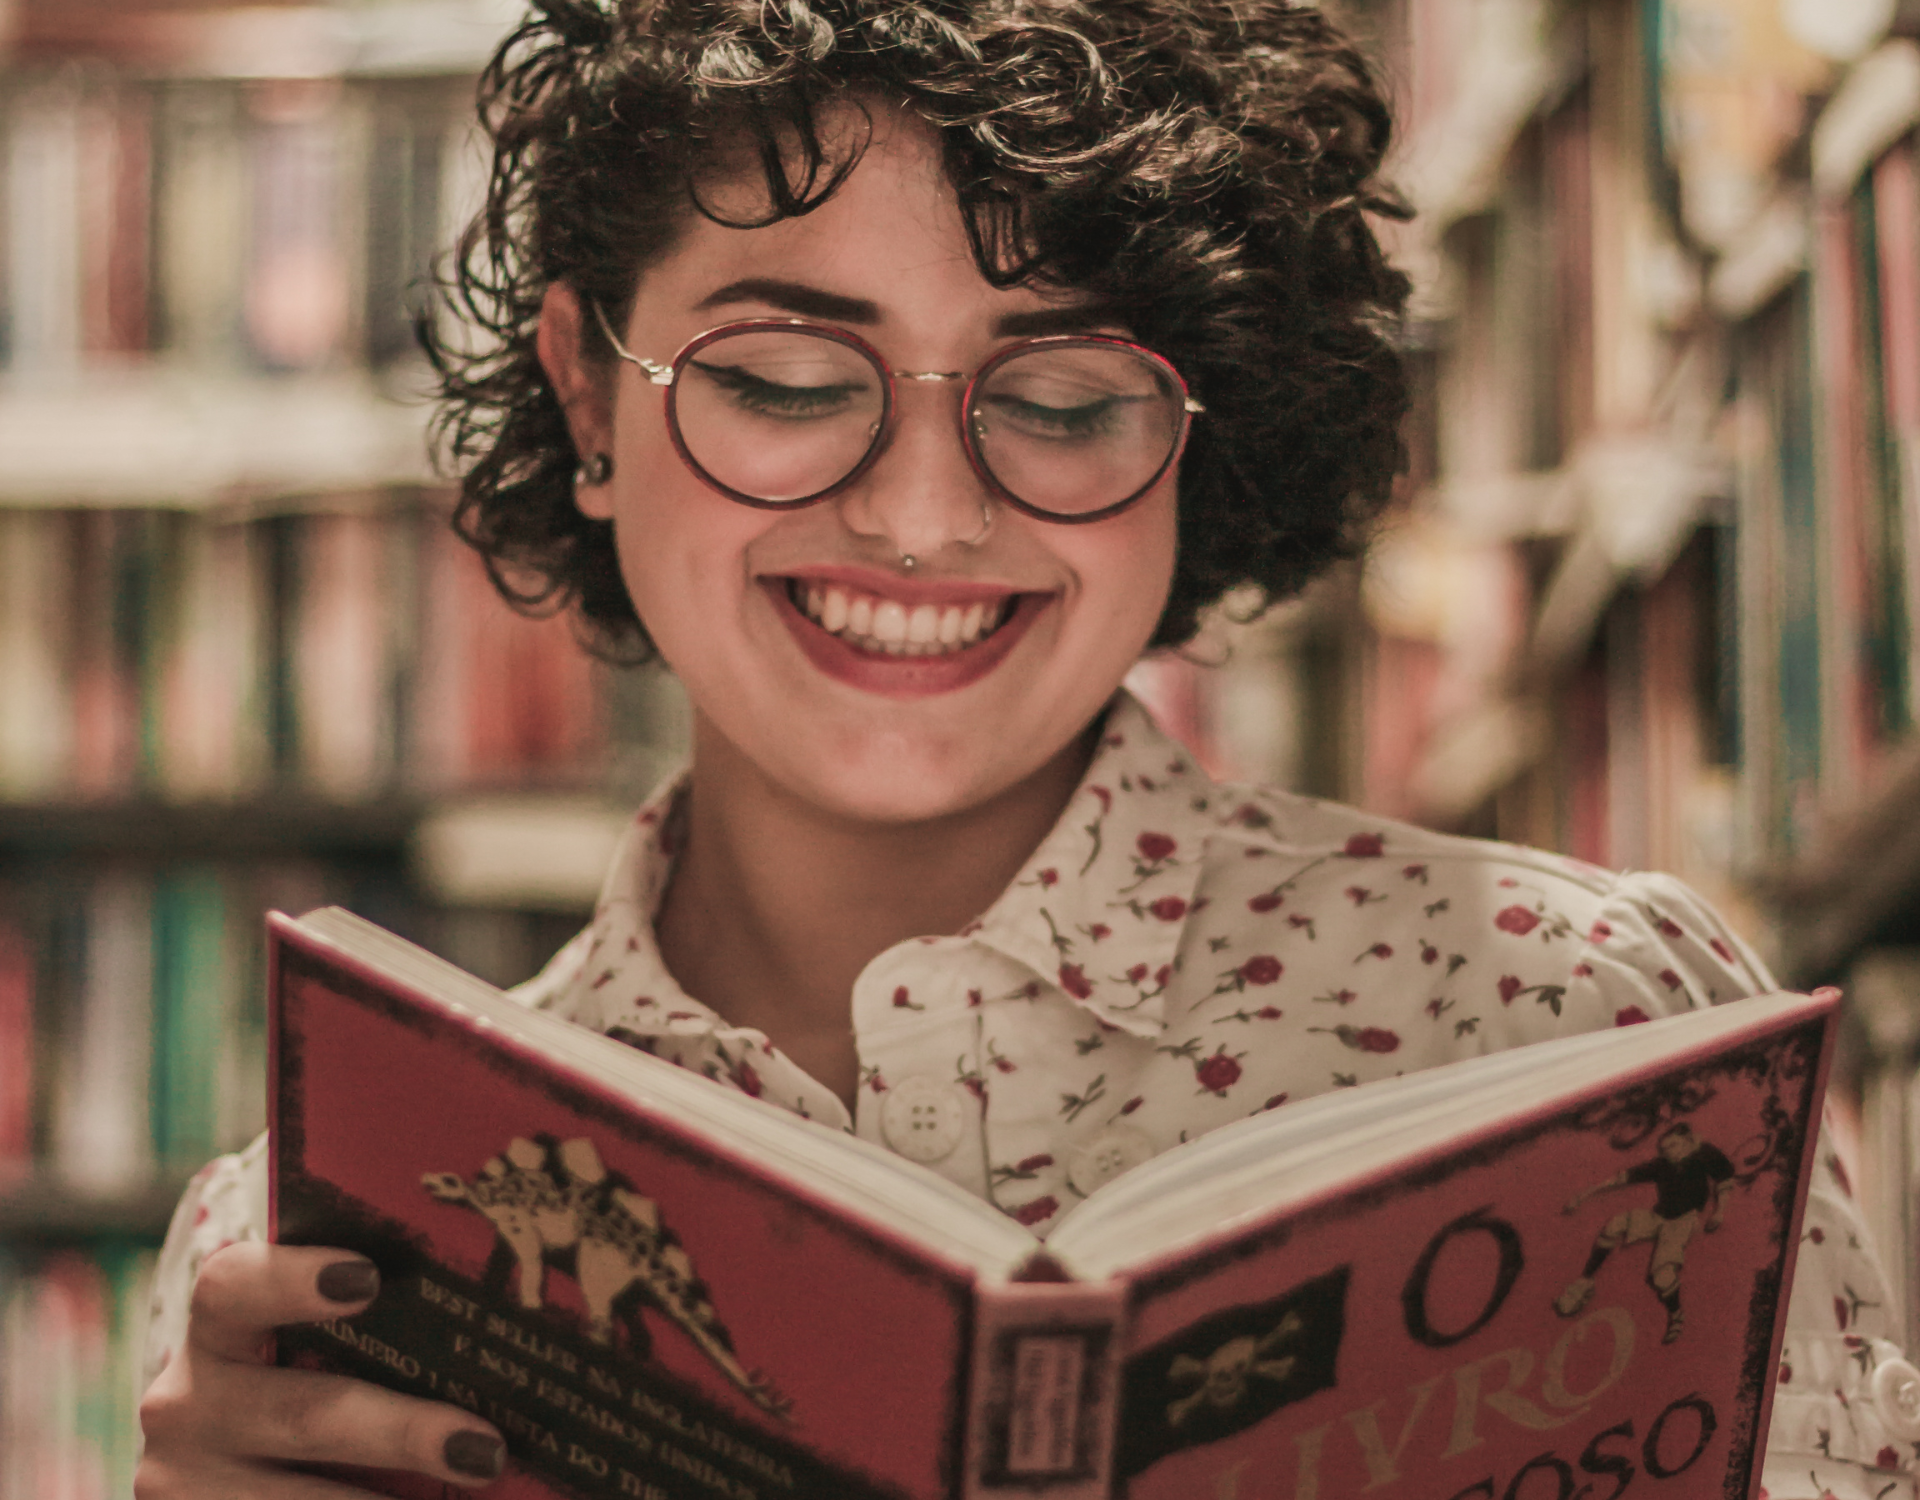 5 Amazing Books Of All Time For You To Read